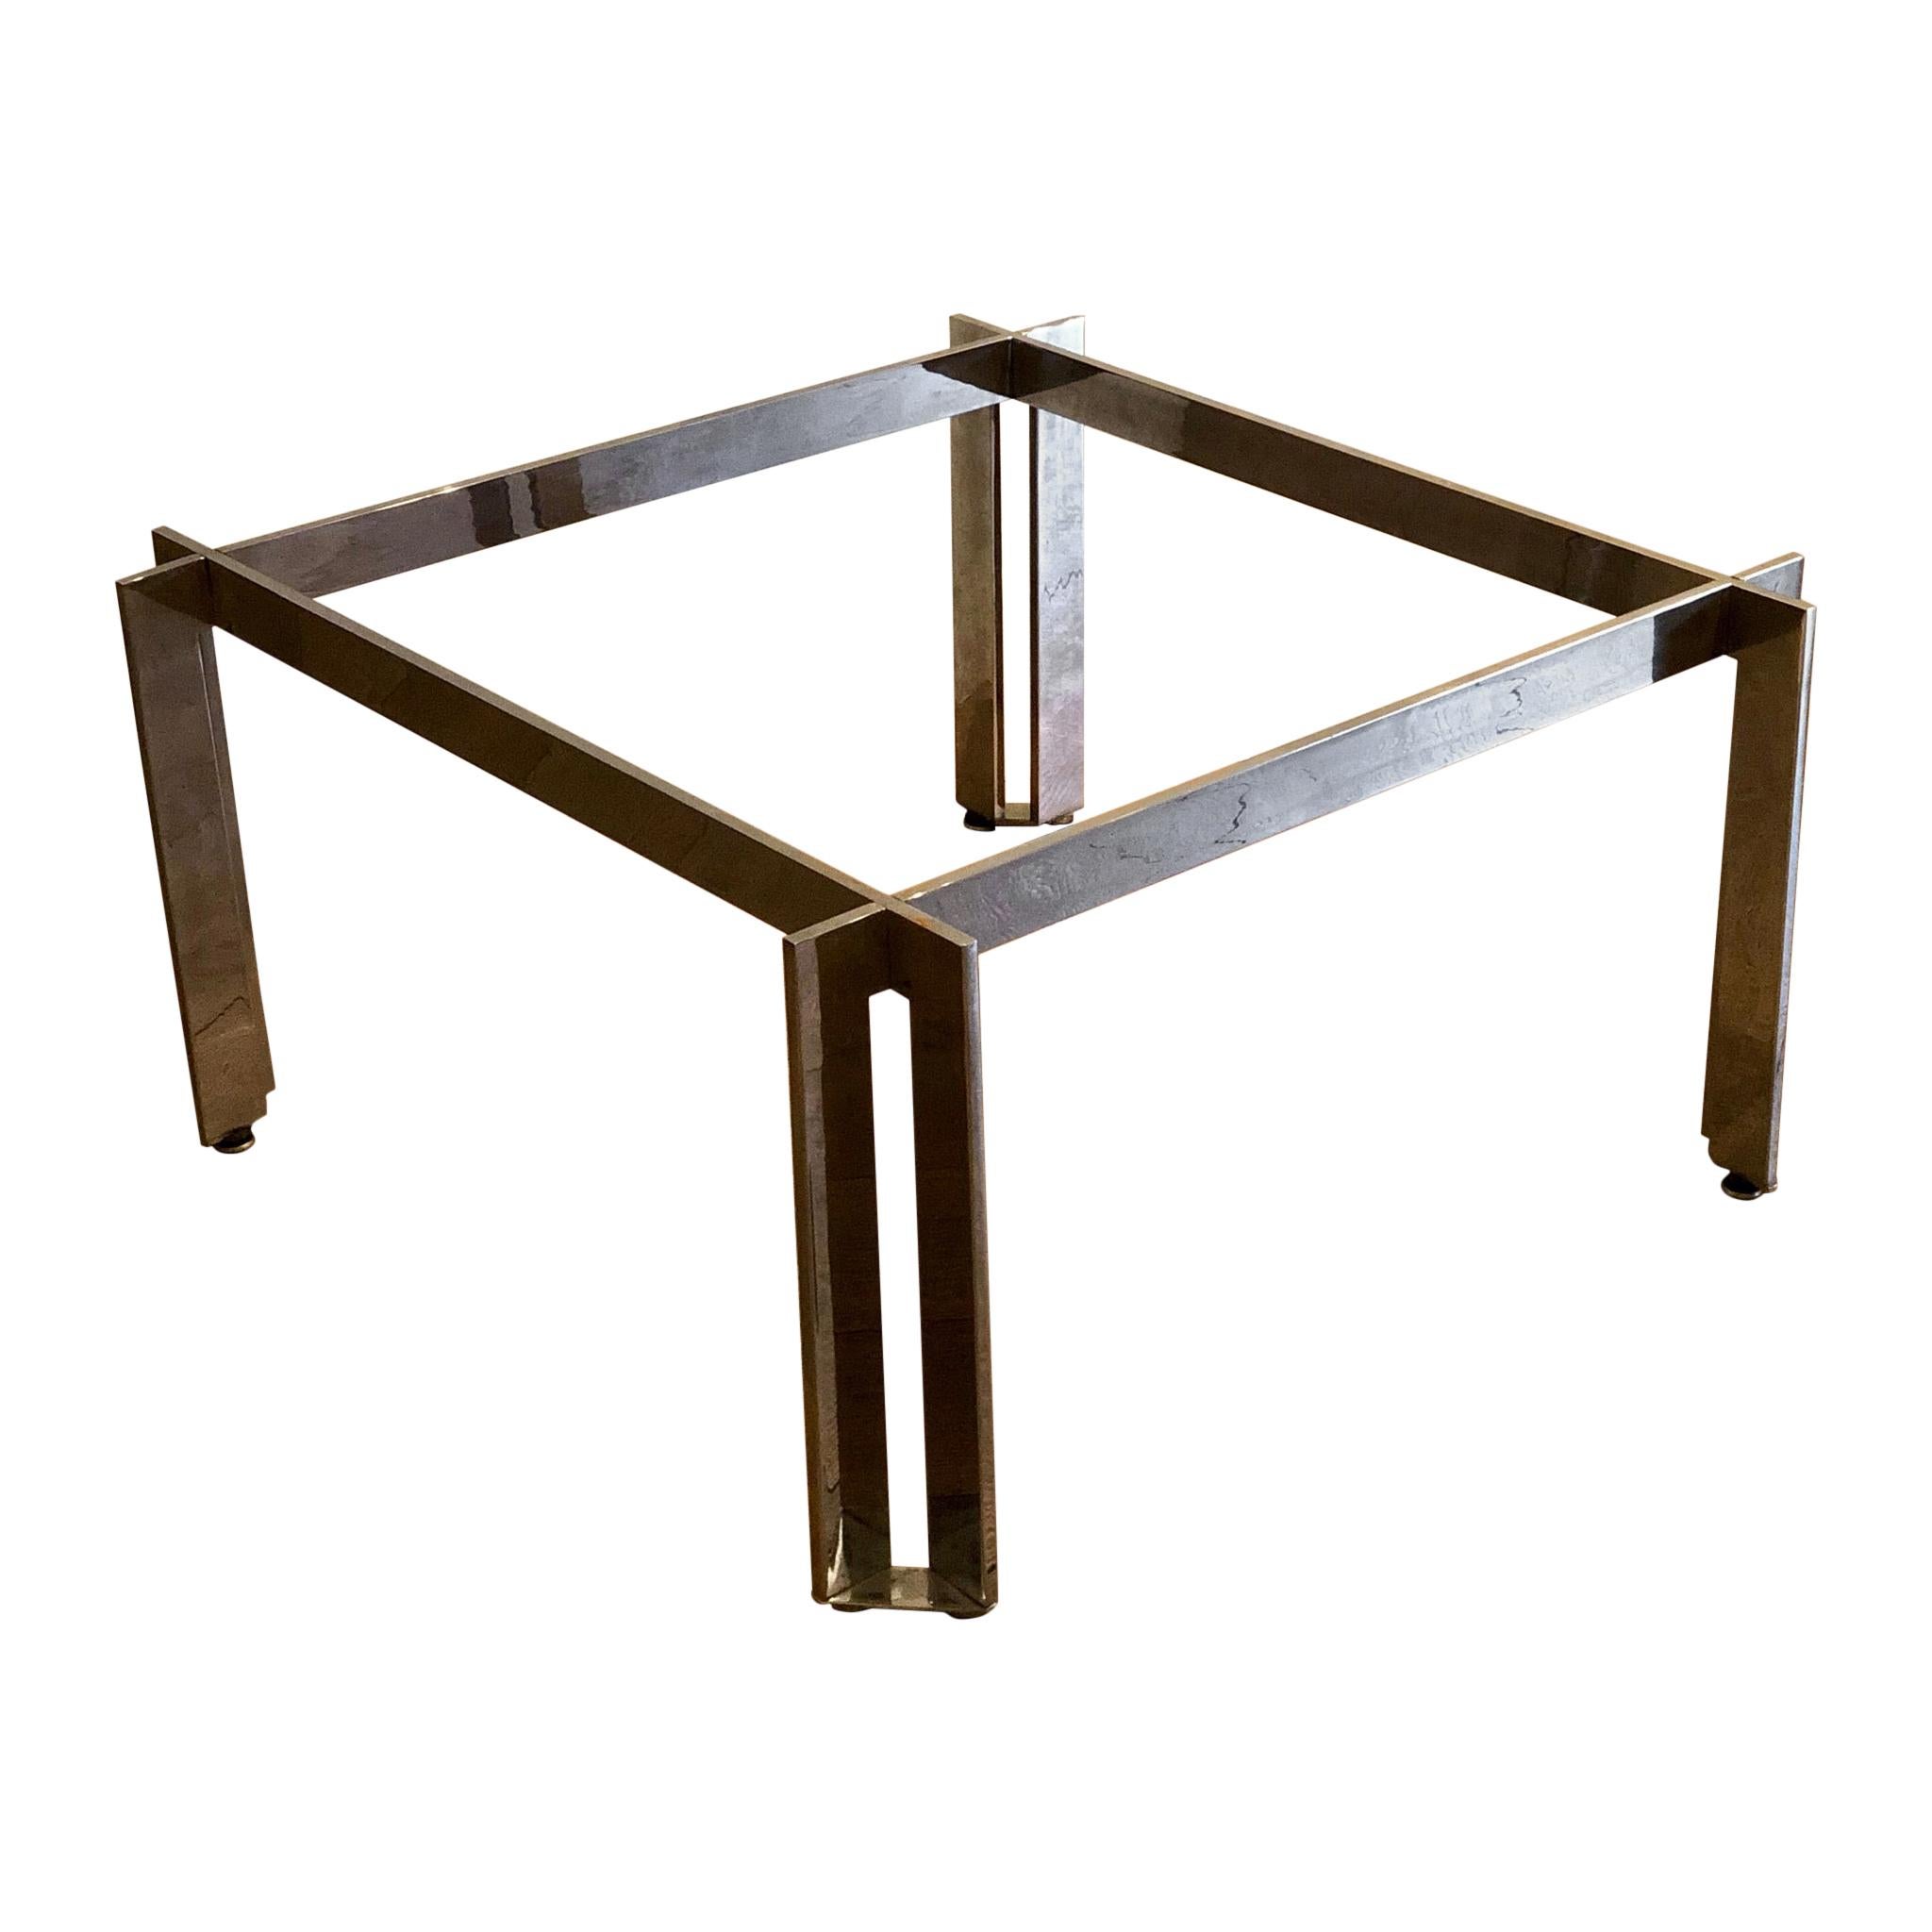 Modernist Midcentury Solid Steel Chrome Finish Square Coffee Table Base